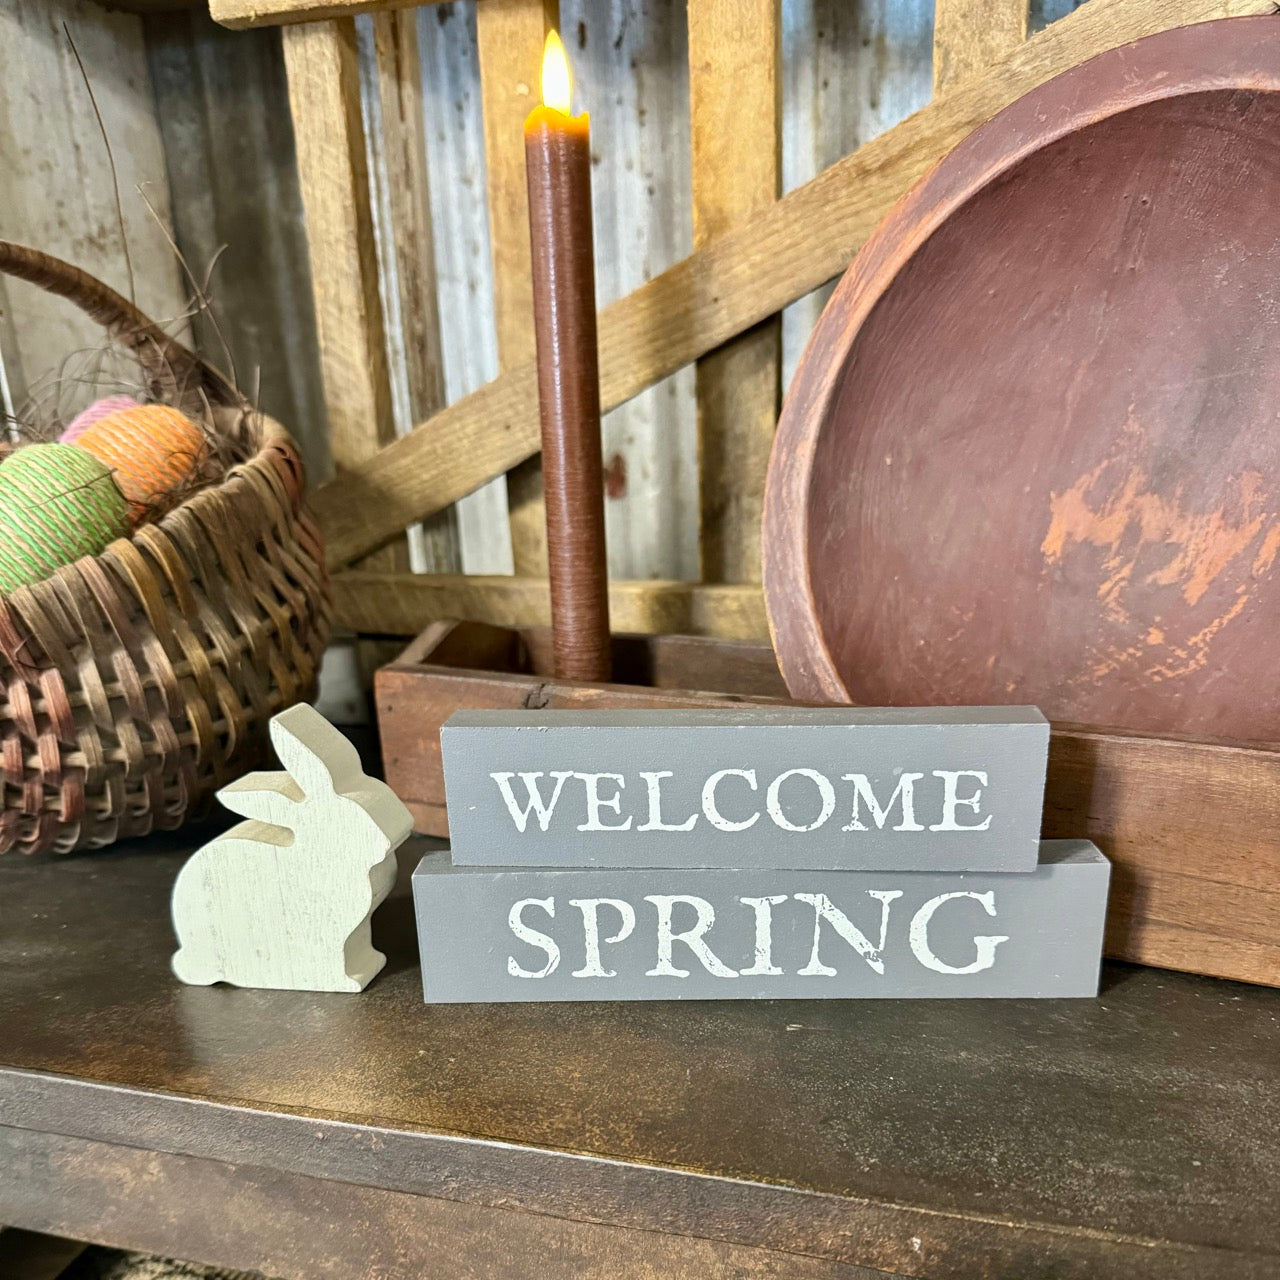 Welcome Spring - Stacking Blocks Country Decor, Decor, Farmhouse Decor, Farmhouse Decorating, Farmhouse Spring Decor, Farmhouse Spring Decorating, New, Spring, Spring Decor, Spring Decorating, Spring Farmhouse Decor, Spring Home Decor 